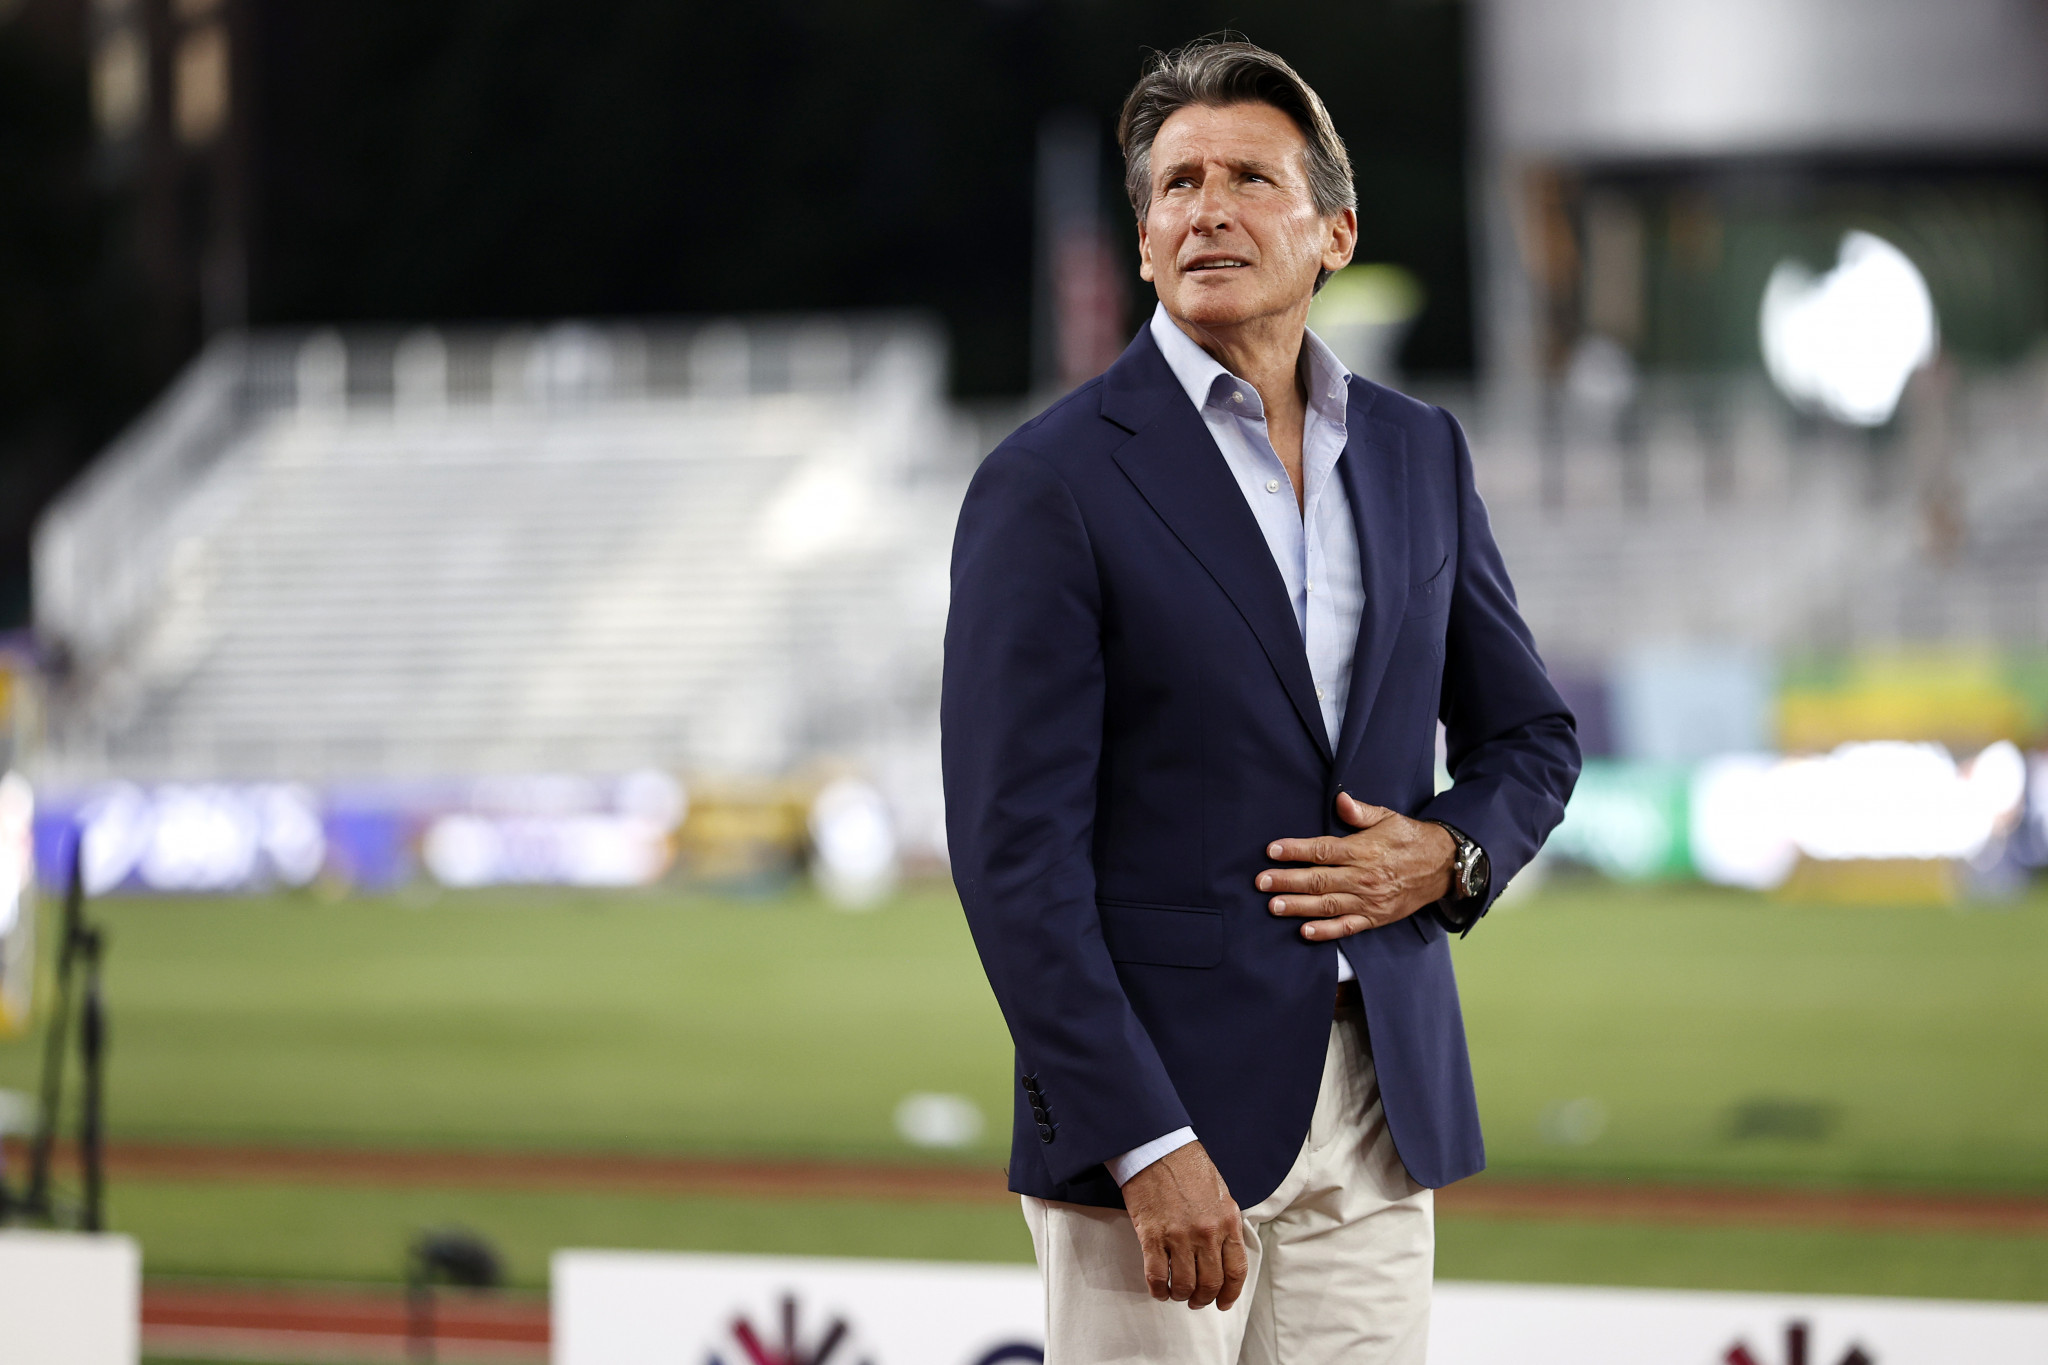 World Athletics President Sebastian Coe was "delighted to welcome Warner Bros. Discovery back" as broadcast partners ©Getty Images